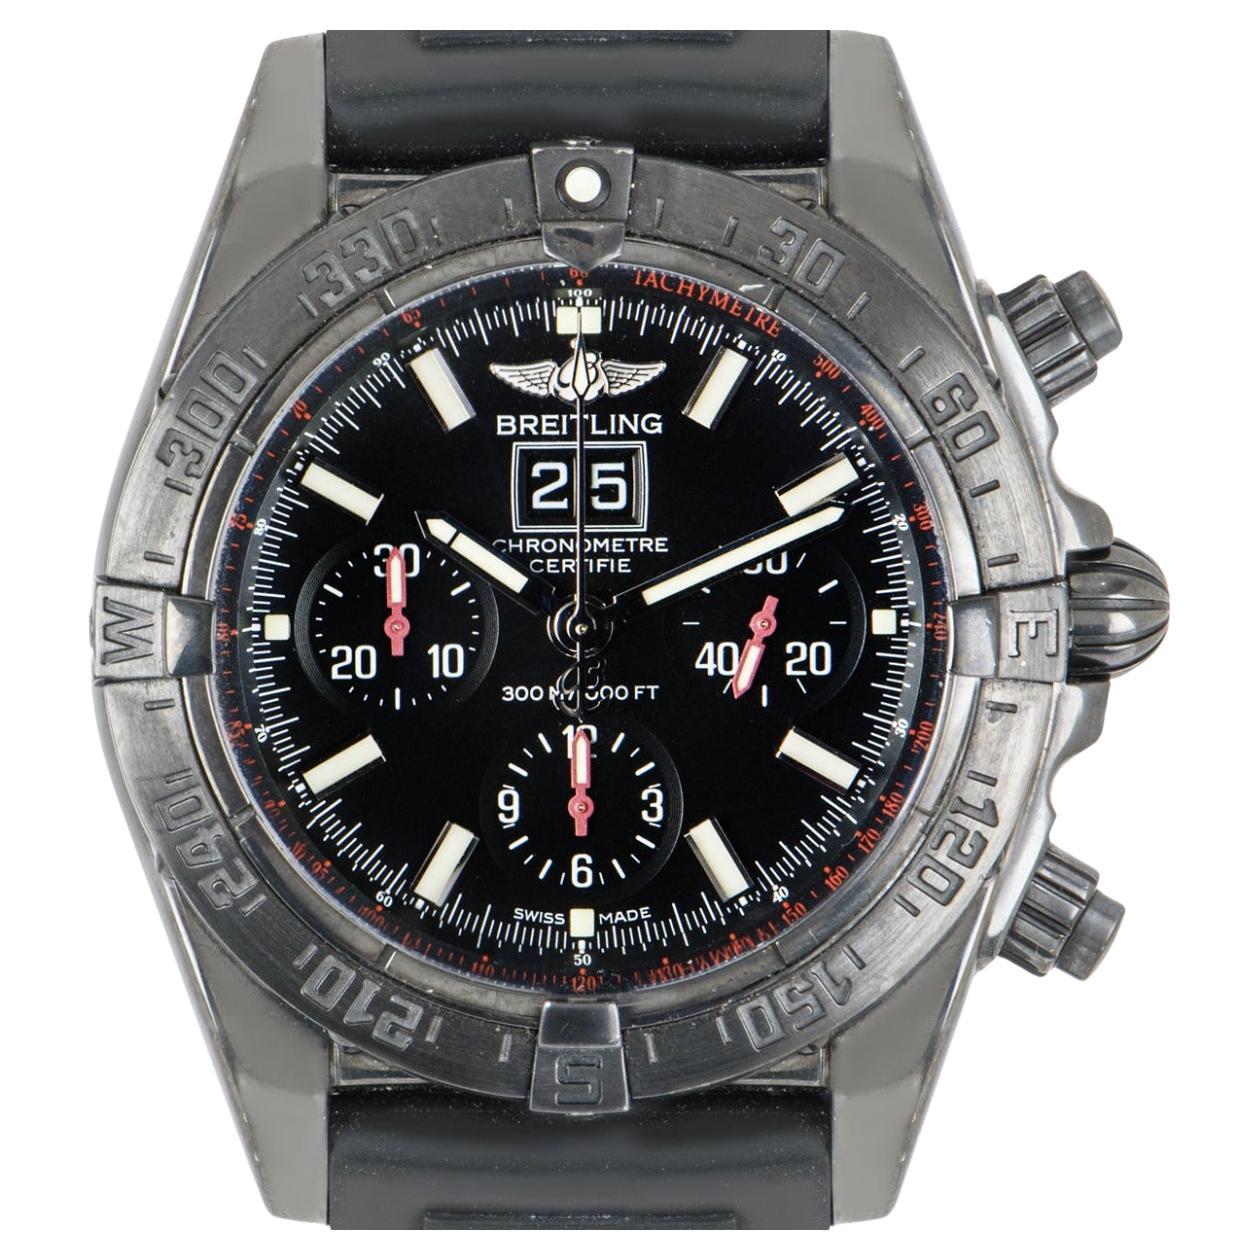 A 44mm Breitling Blackbird wristwatch crafted in stainless steel. Features a black dial with a date aperture, 3 subdials displaying the hours, minutes, small seconds, and a bi-directional stainless steel bezel. 

Fitted with a scratch resistant